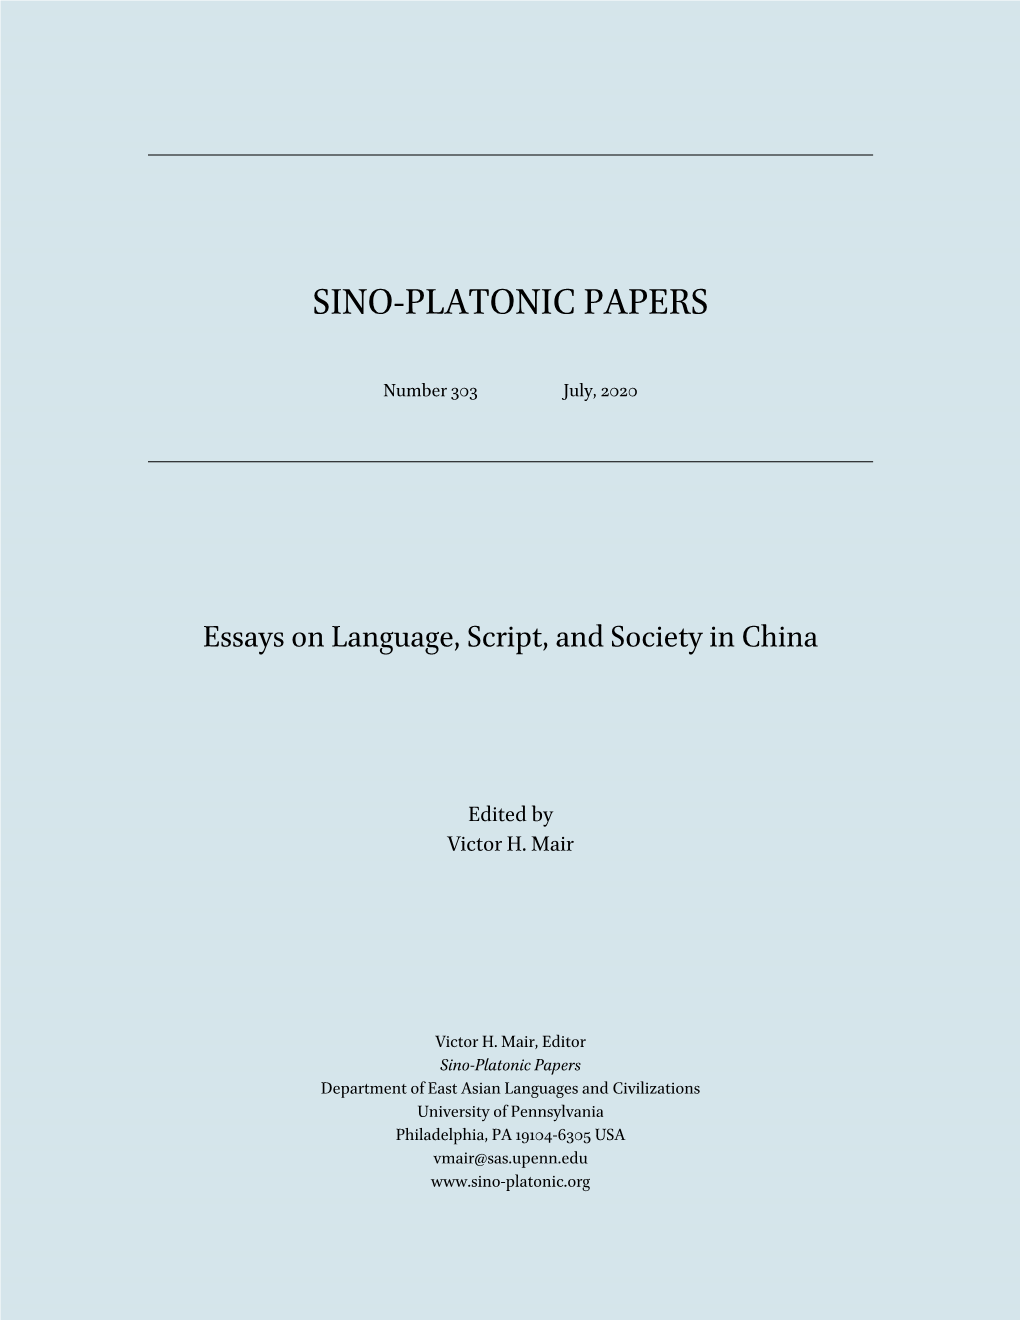 Essays on Language, Script, and Society in China